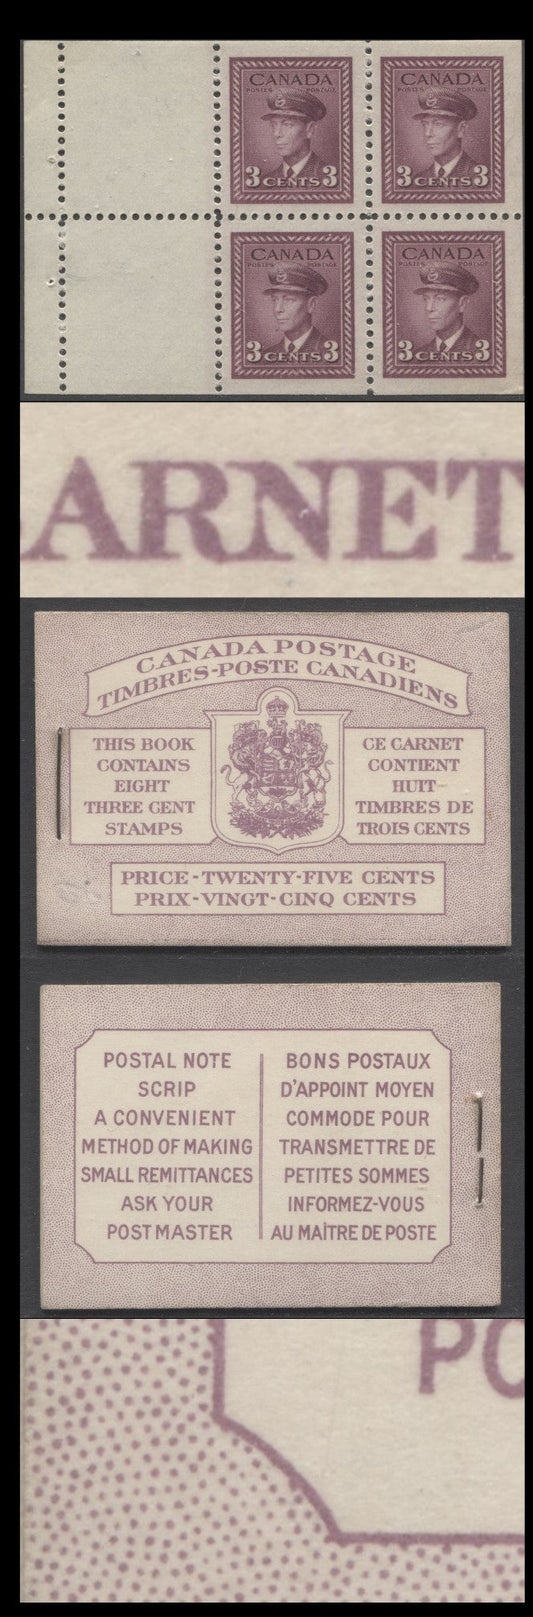 Lot 96A Canada #BK35dB 1942-1947 War Issue, A Complete 25c Bilingual Booklet, 2 Panes Of 4+2 Labels 3c Rose Violet, Front Cover IIId, Back Cover Fai, Type II, 7c & 5c Rates Page, 407,000 Issued